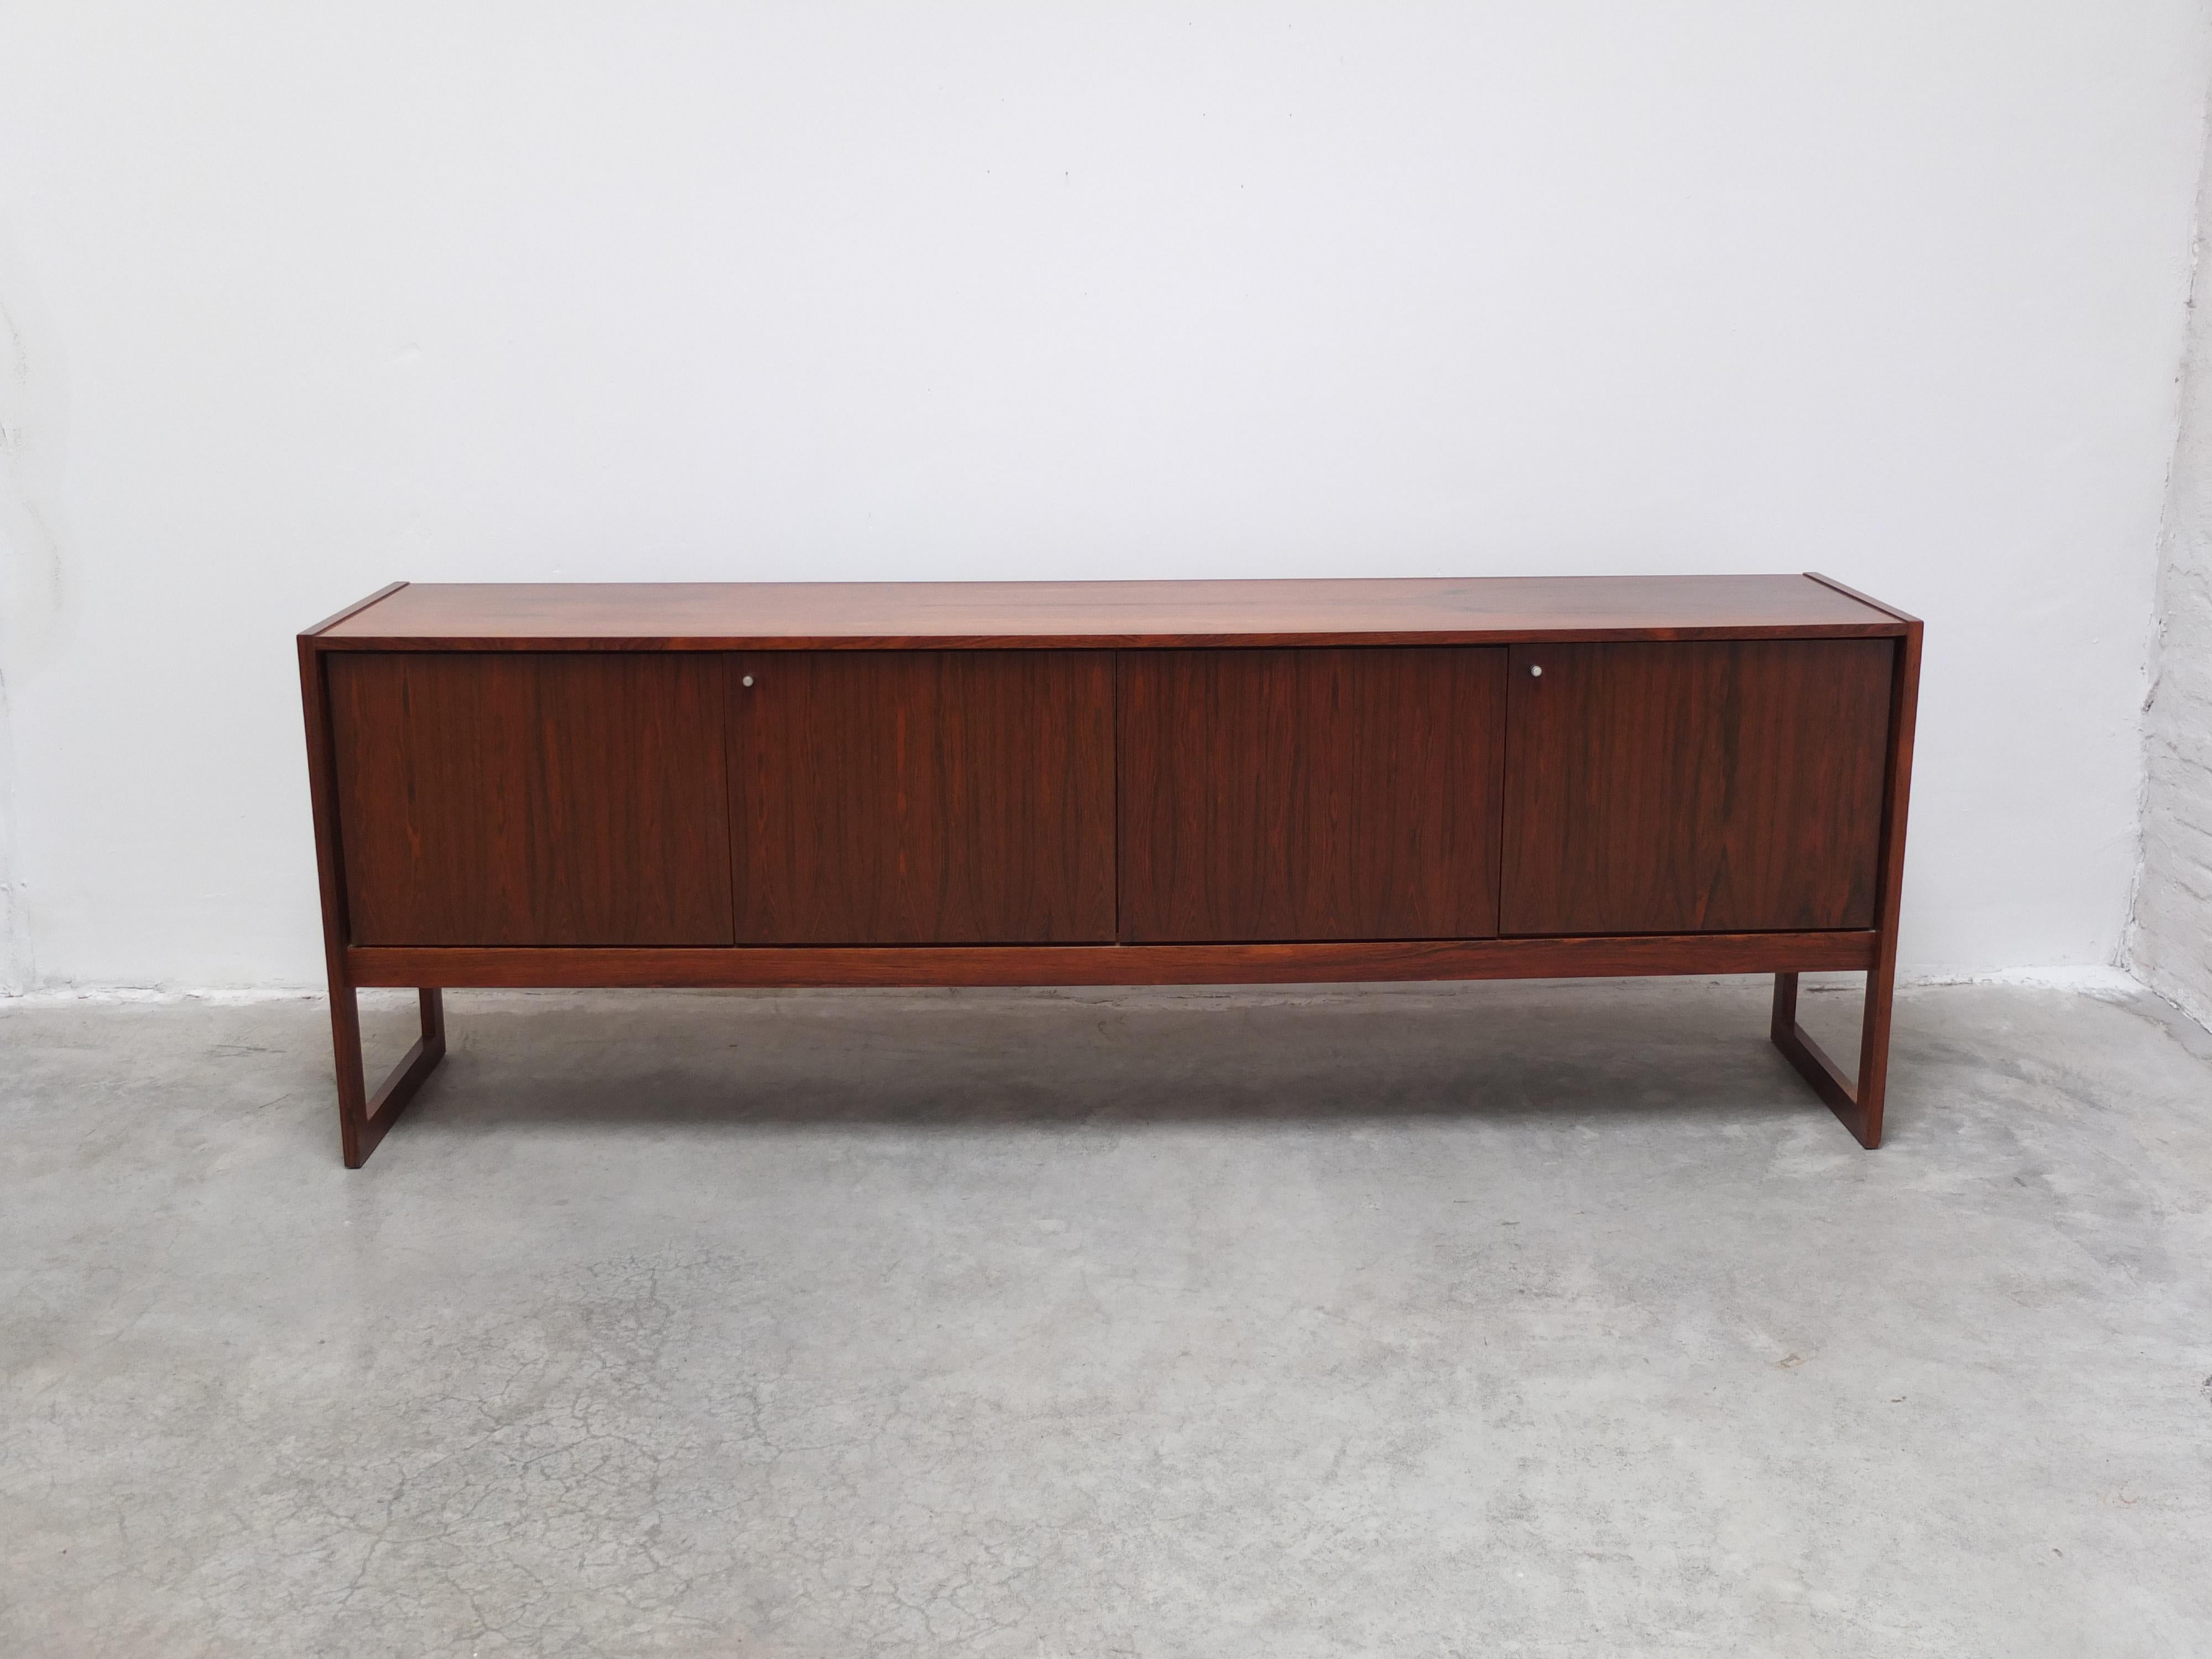 Stunning large sideboard produced by V-Form in Belgium around 1965. The sideboard is part of the ‘Tecton’ series which appears to be an expensive high-end dining furniture line that V-Form produced only in very low numbers. The quality and details